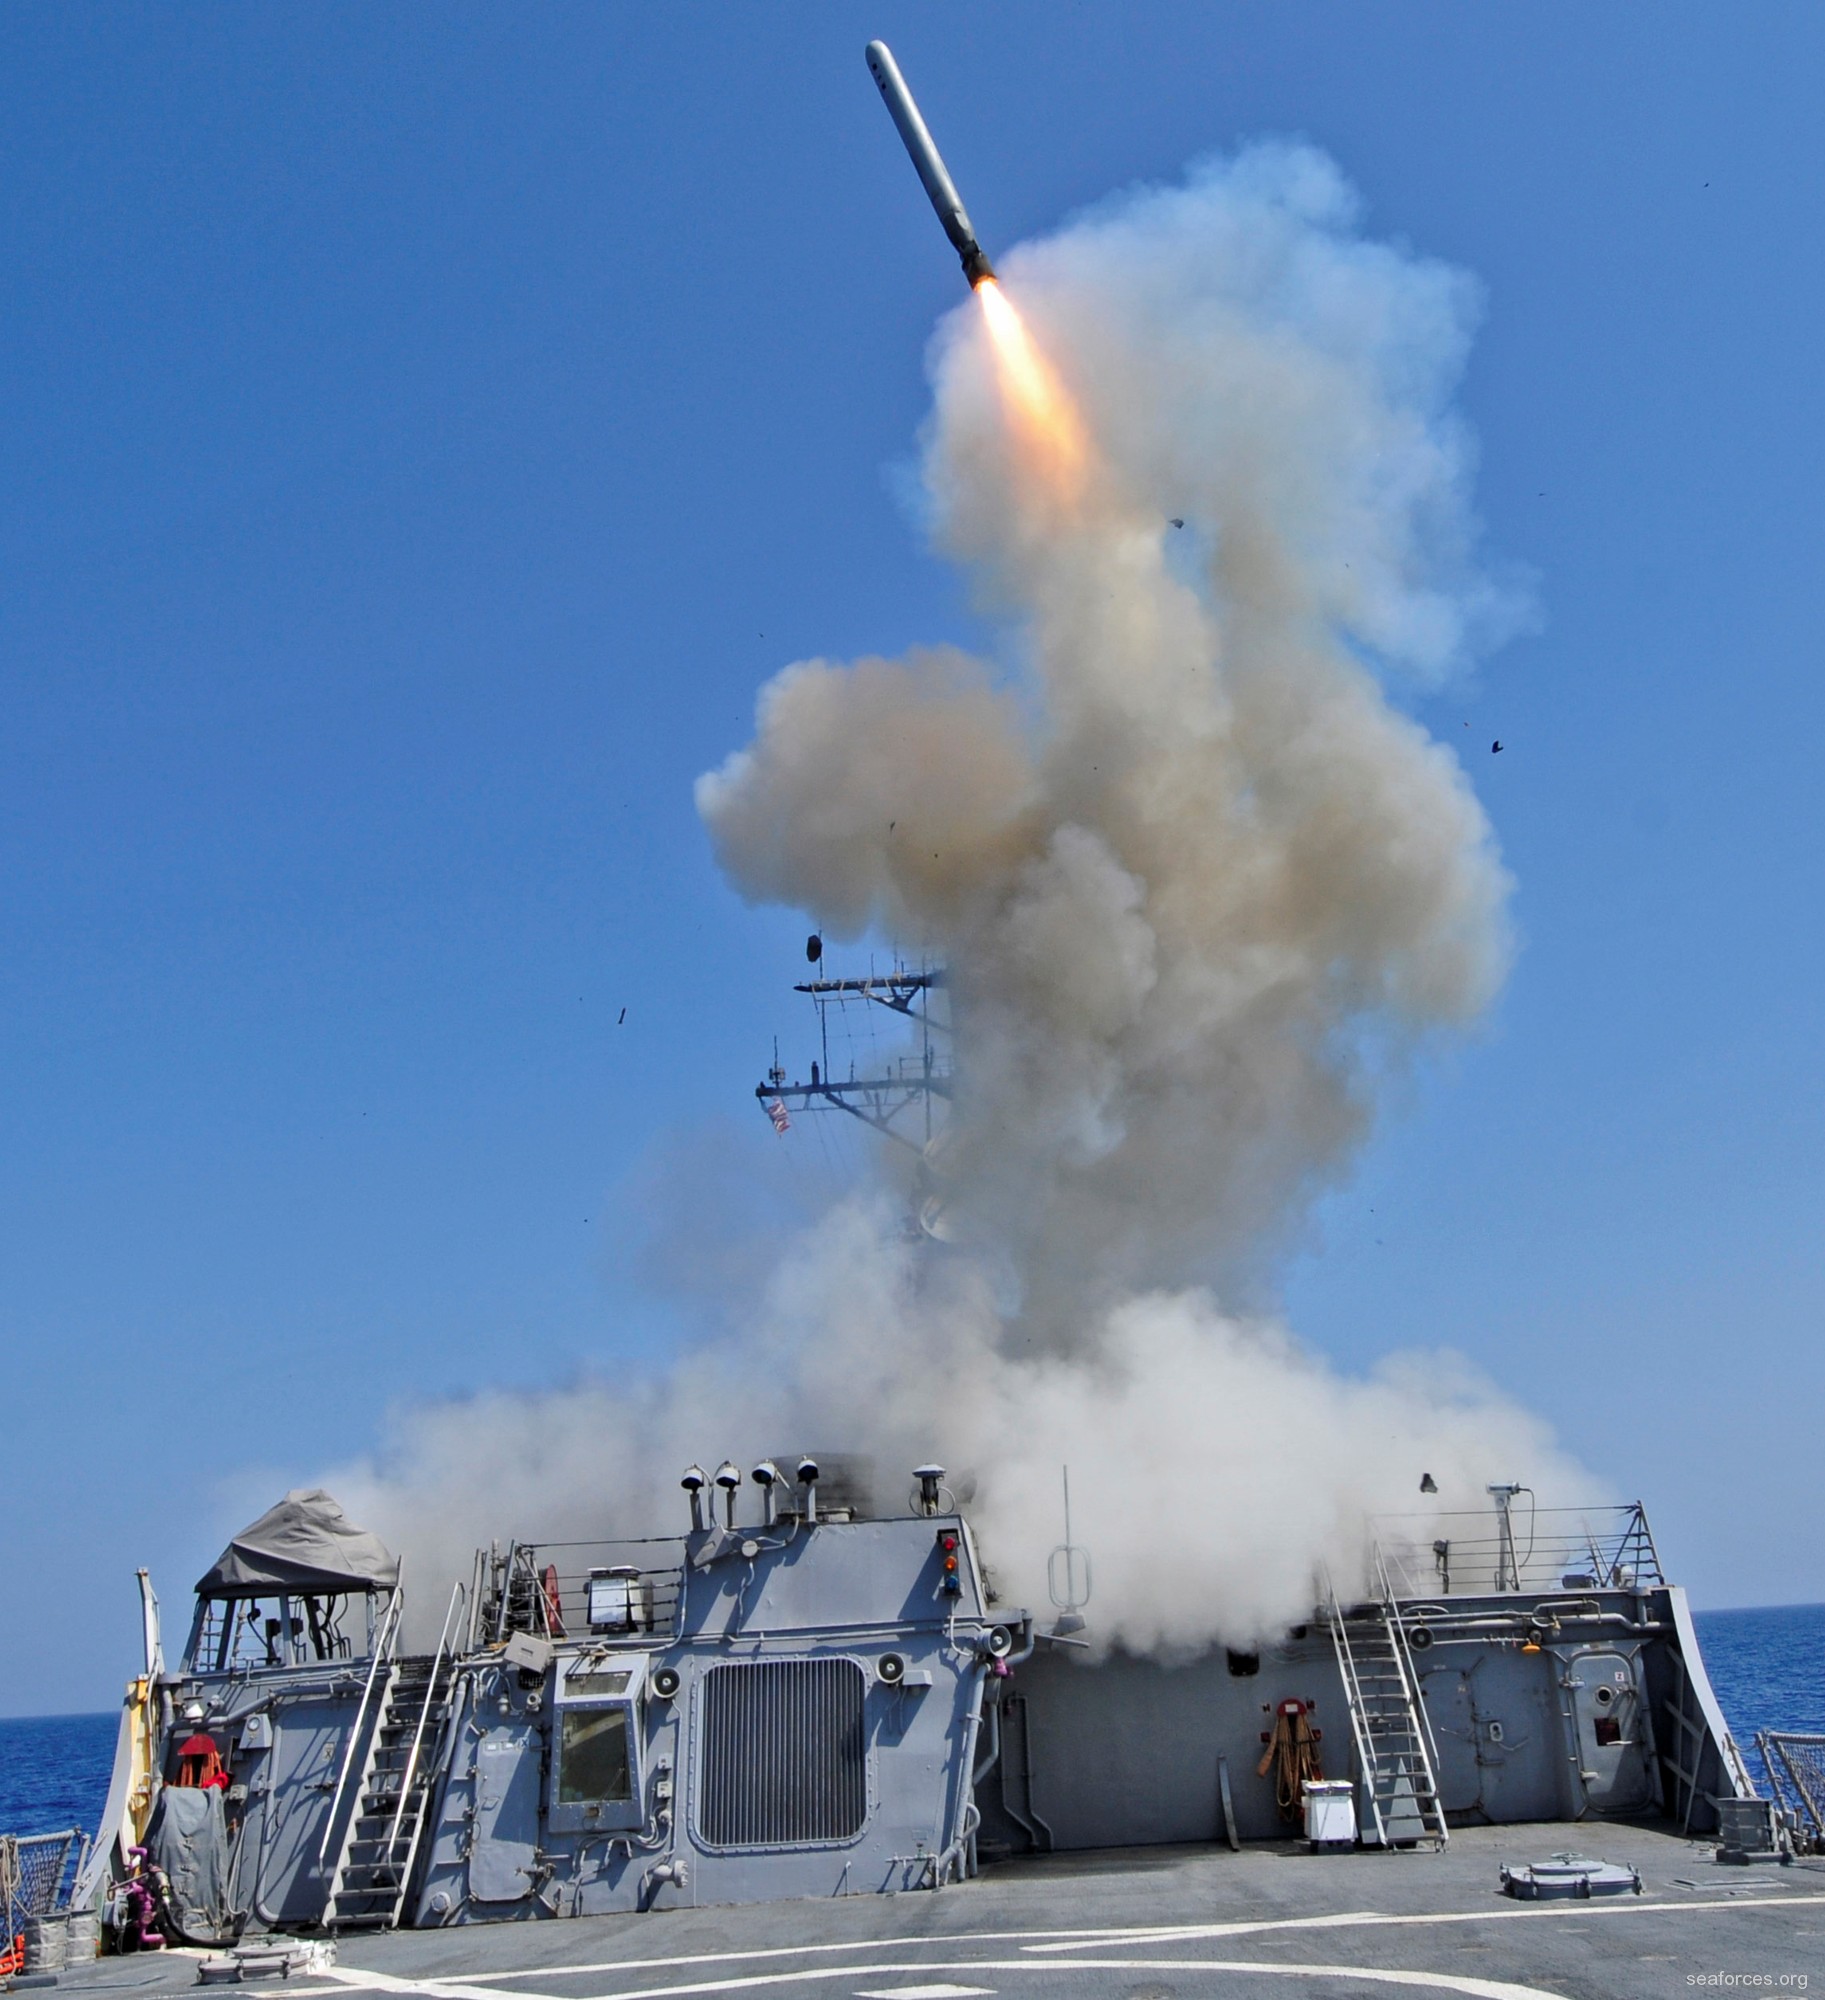 ddg-52 uss barry guided missile destroyer us navy 60 bgm-109 tomahawk tlam missile lybia